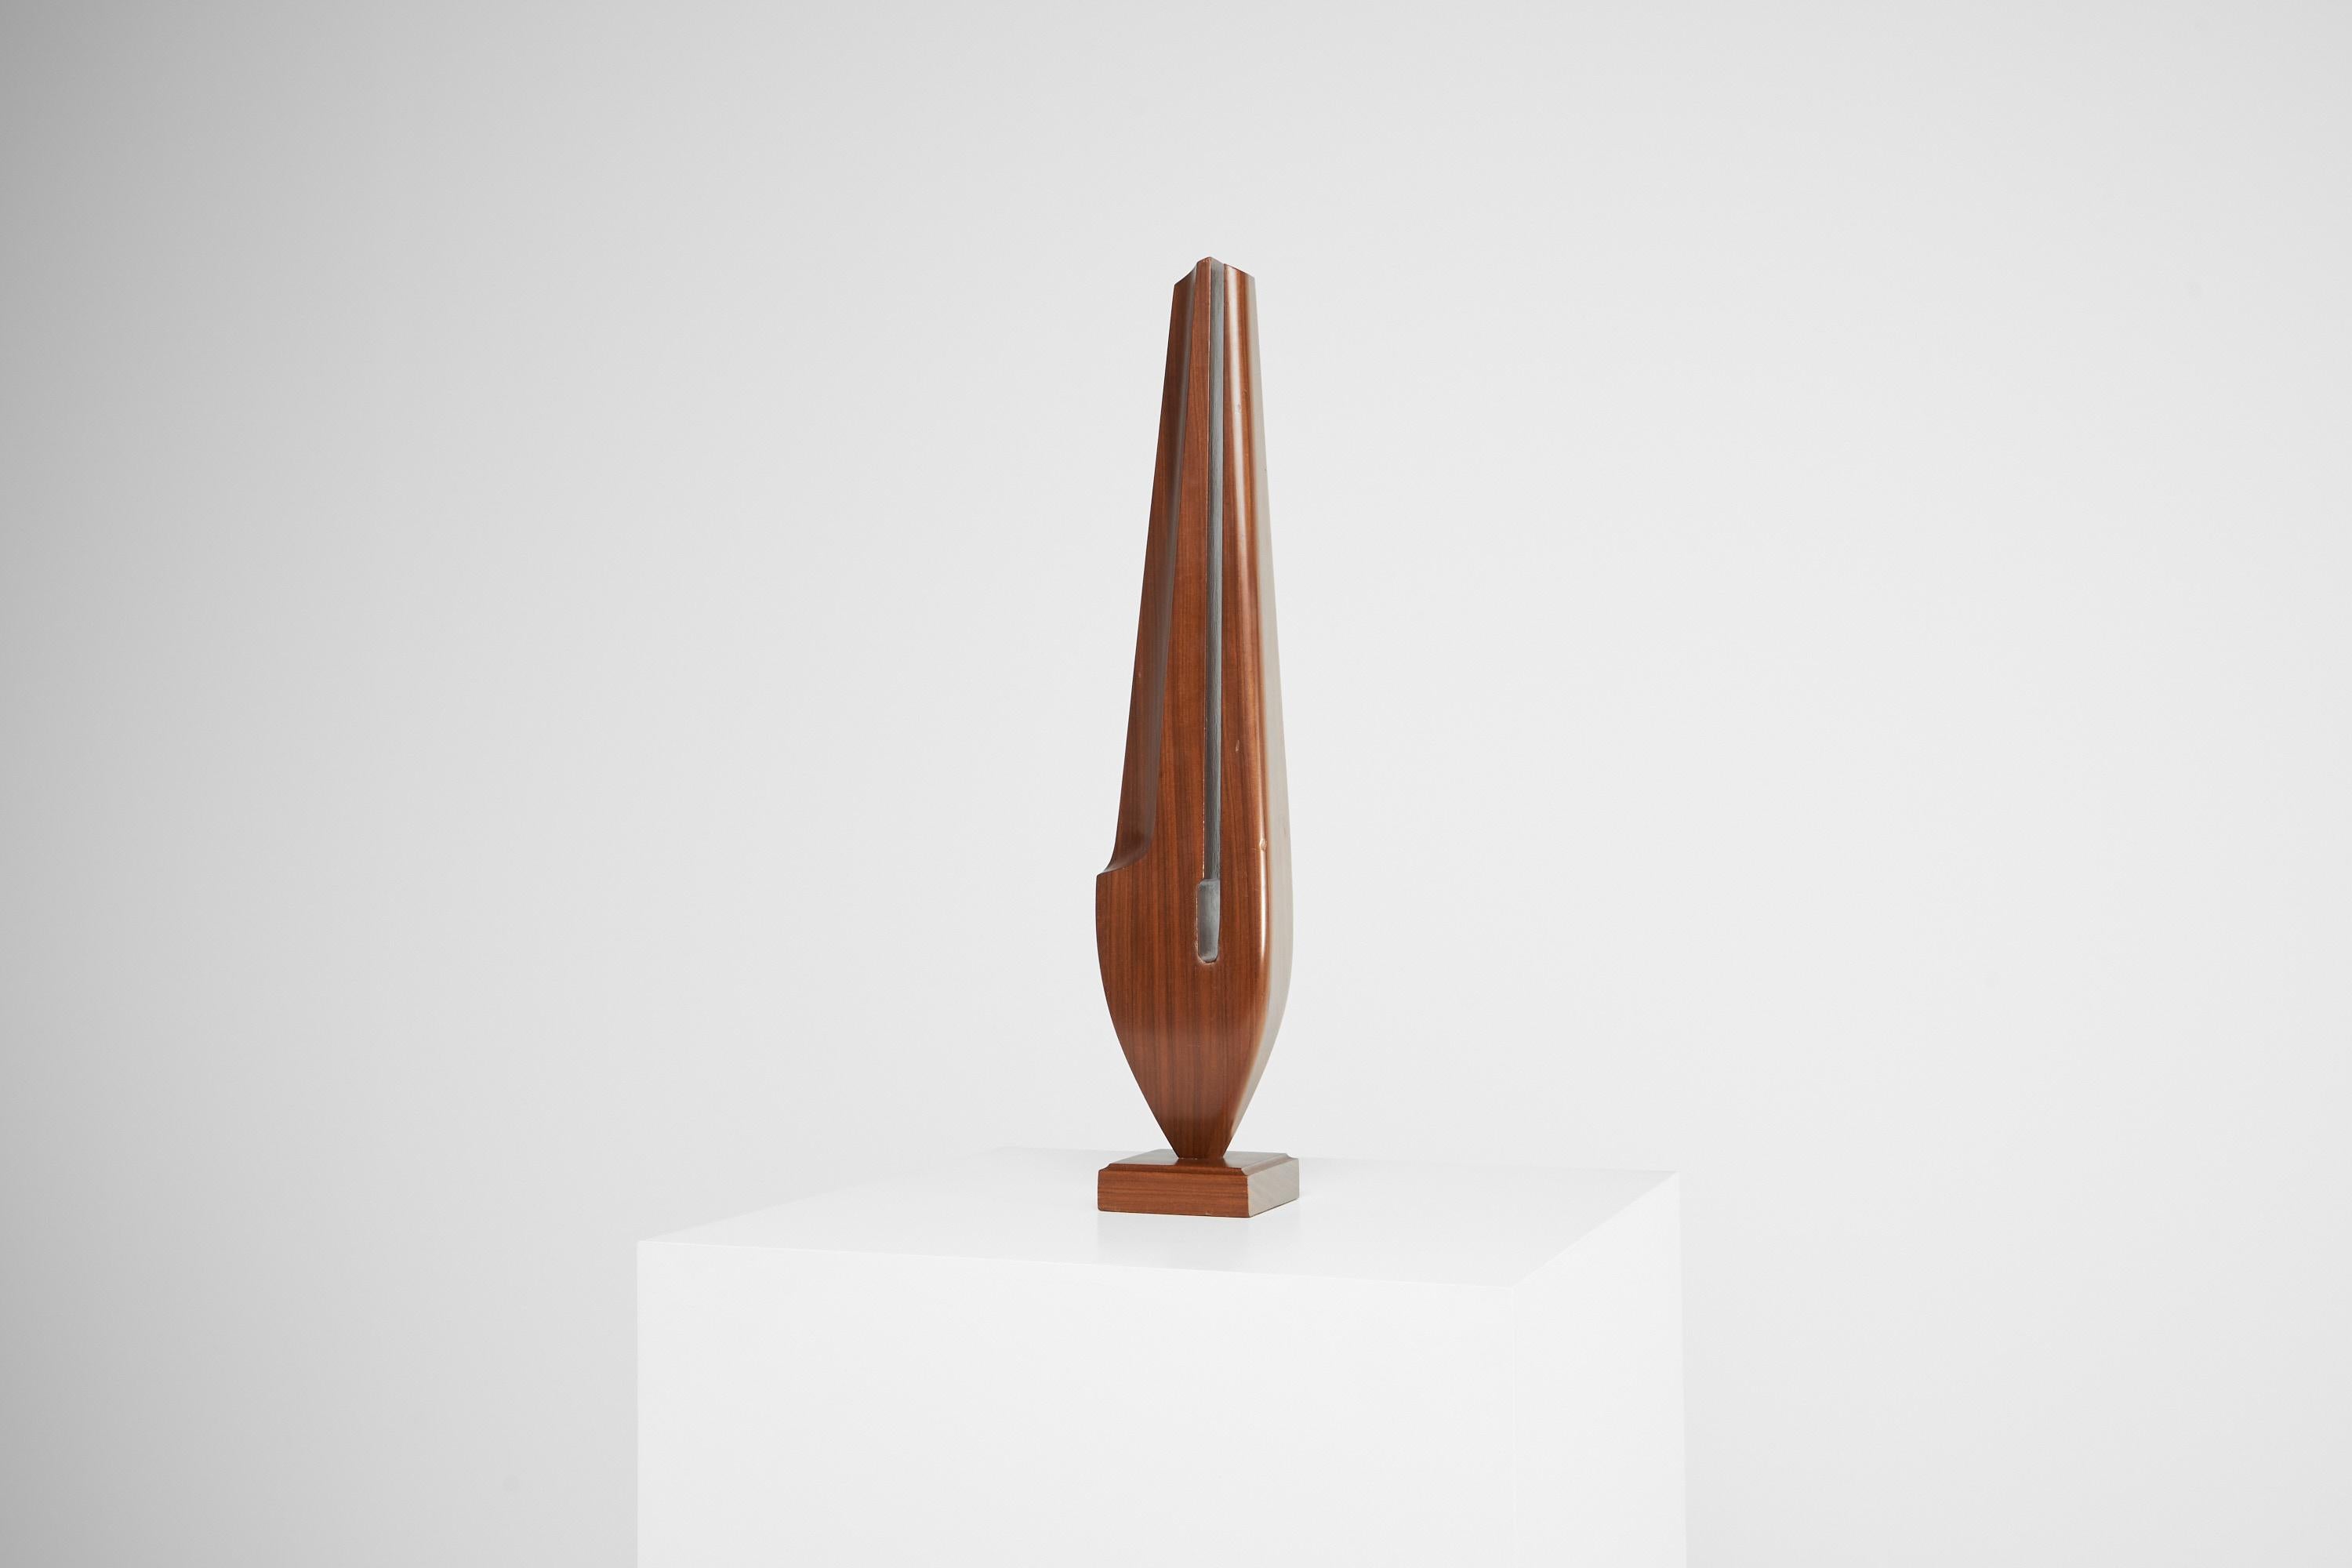 Very visually pleasing and interesting sculpture, made in France by unknown artist in 1960. This one of a kind piece is made out of solid teak wood with the pattern running vertically and has a light patina which makes it even look better.